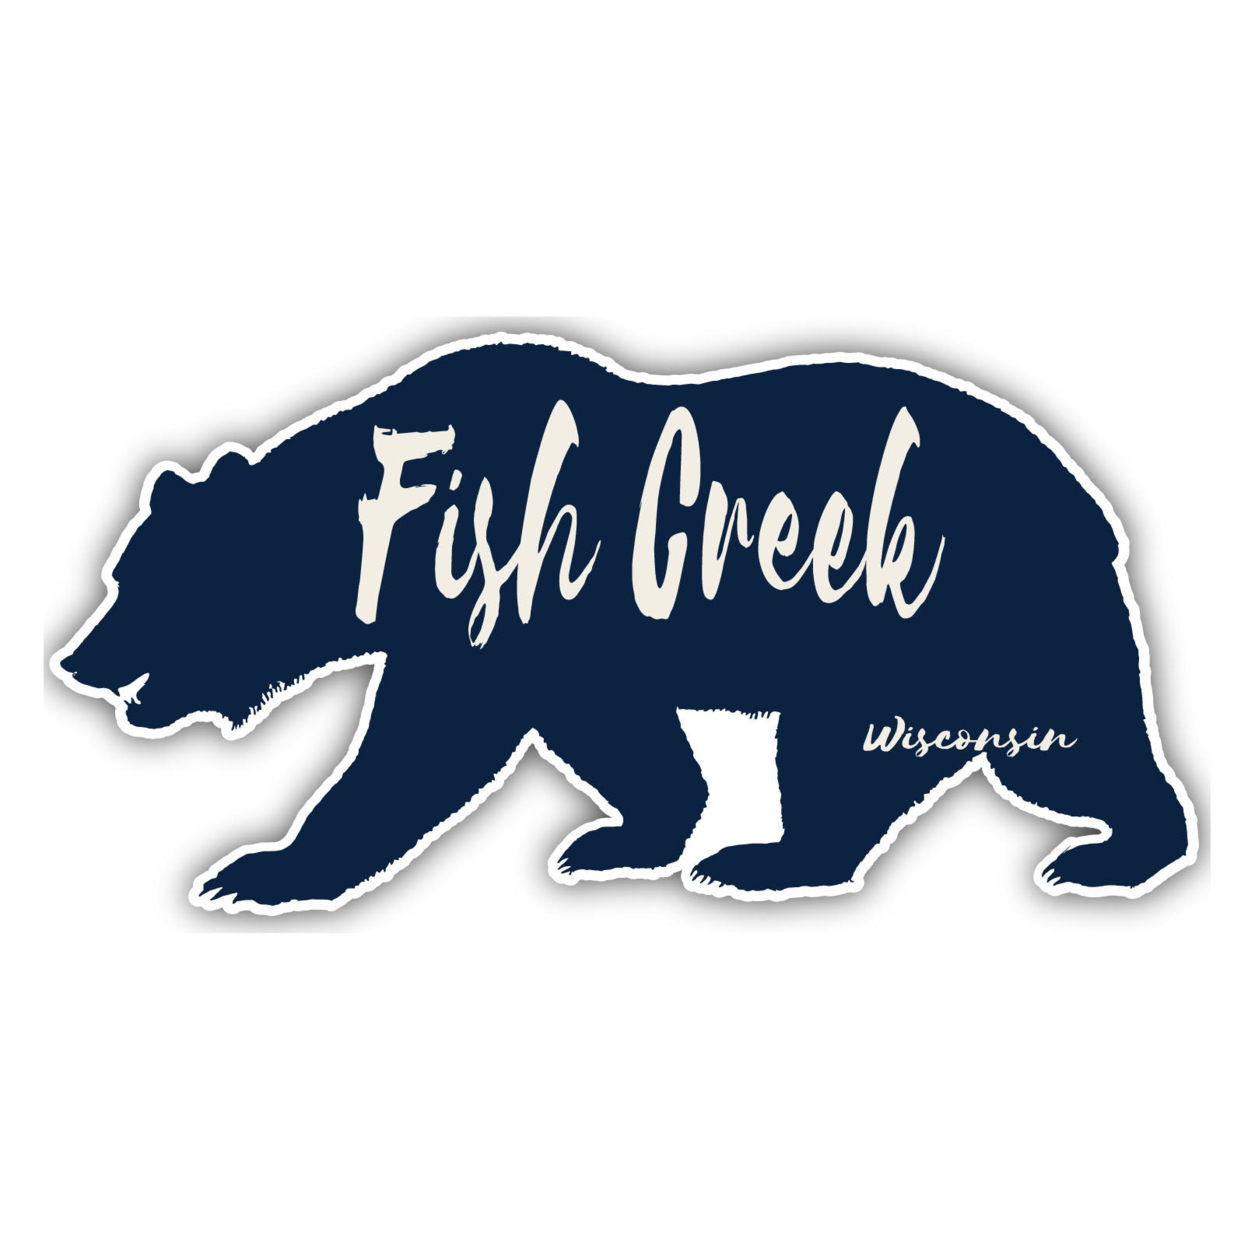 Fish Creek Wisconsin Souvenir Decorative Stickers (Choose Theme And Size) - 4-Pack, 4-Inch, Bear